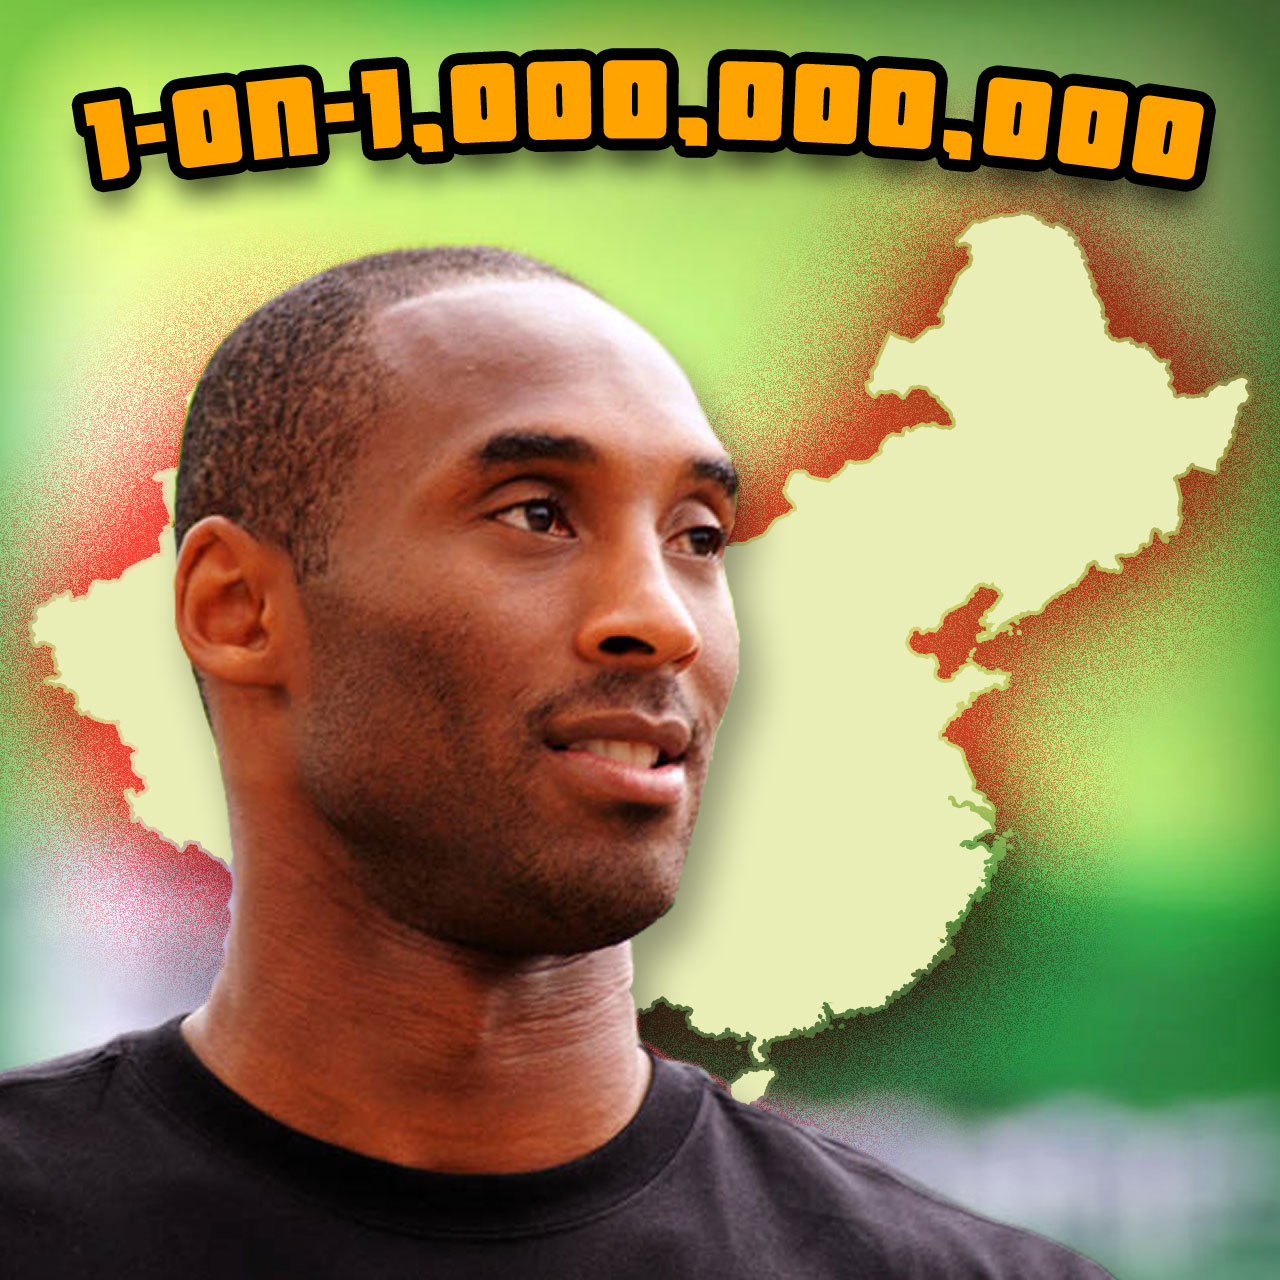 Kobe Bryant in China takes on all comers in an endless one-on-one game